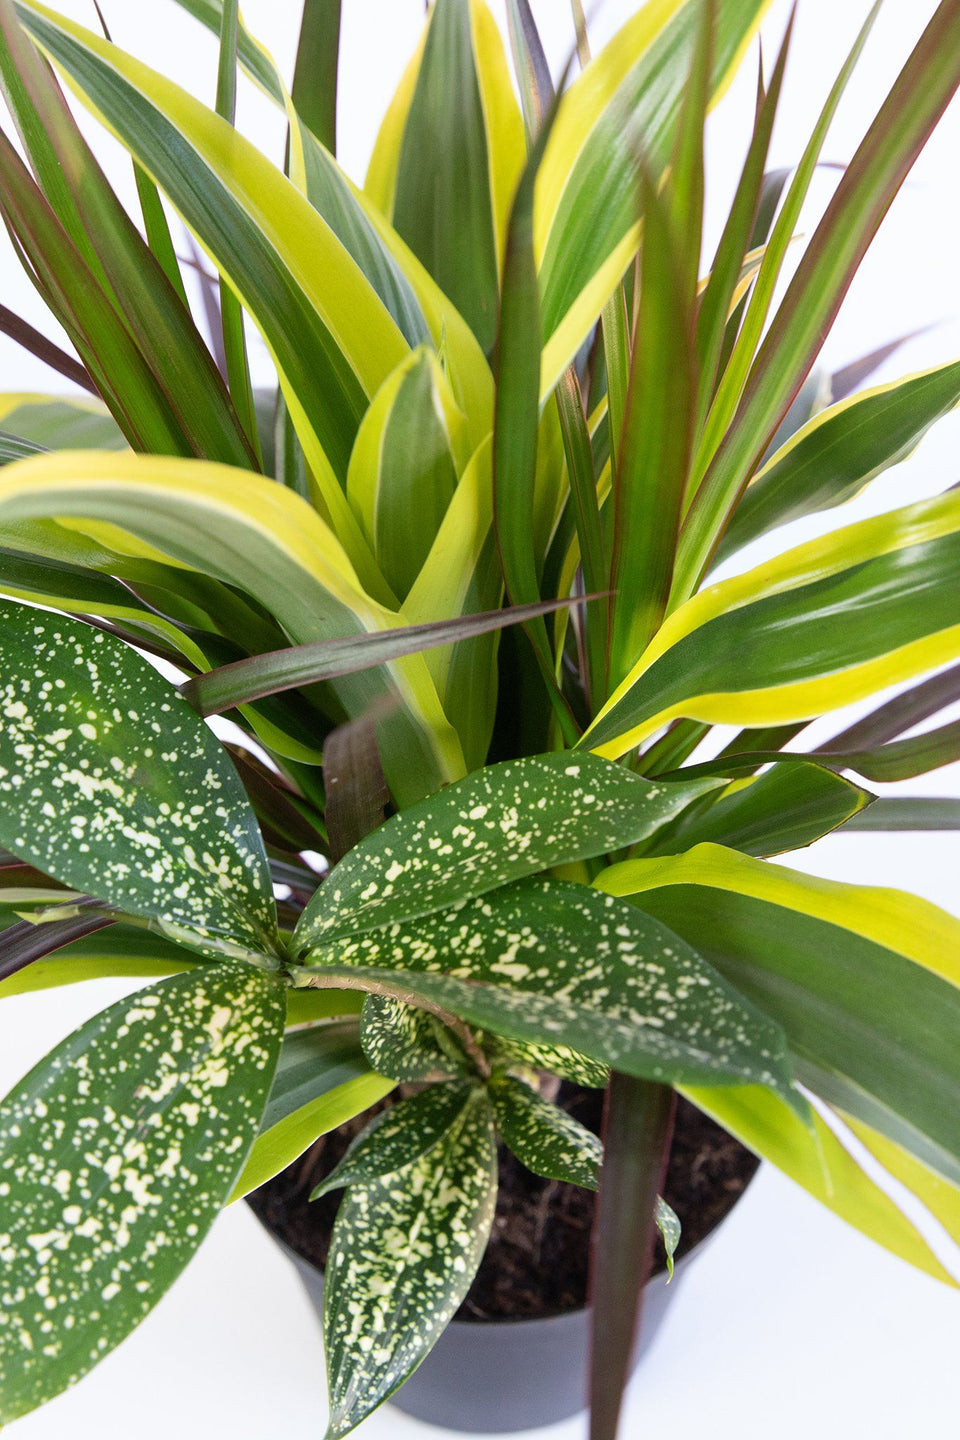 Black Leaf Dragon Tree Collection (Dracaena) Featured Image